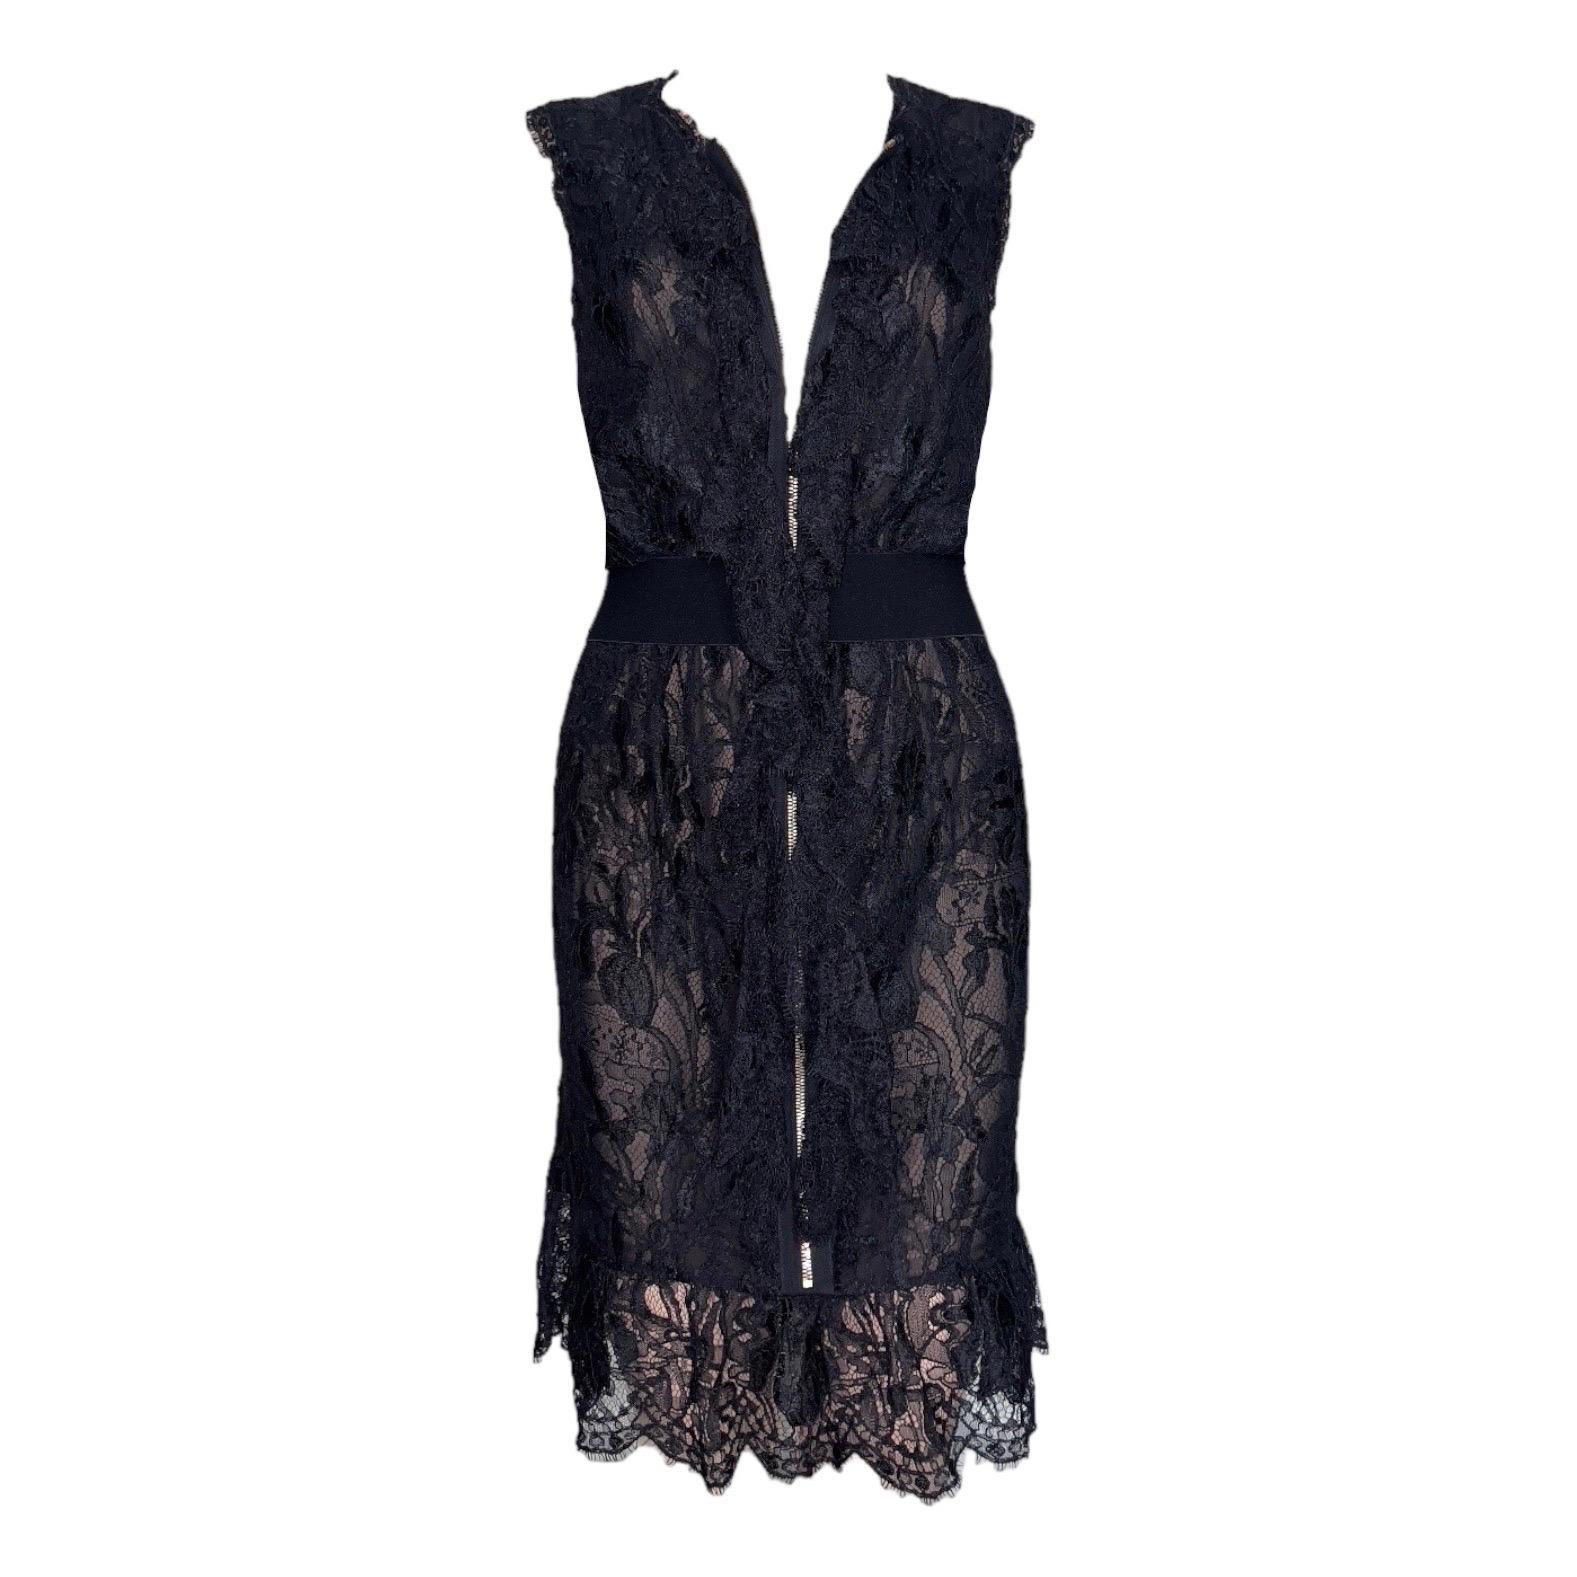 Stunning Emilio Pucci dress
Designed by Peter Dundas
Black lace
Adjustable décolleté 
Zipper Detail
Finest French lace
Scalloped hem
Lined with finest stretch silk
Made In Italy
Dry Clean Only
Retails for 3549$
Size IT 42
Unworn